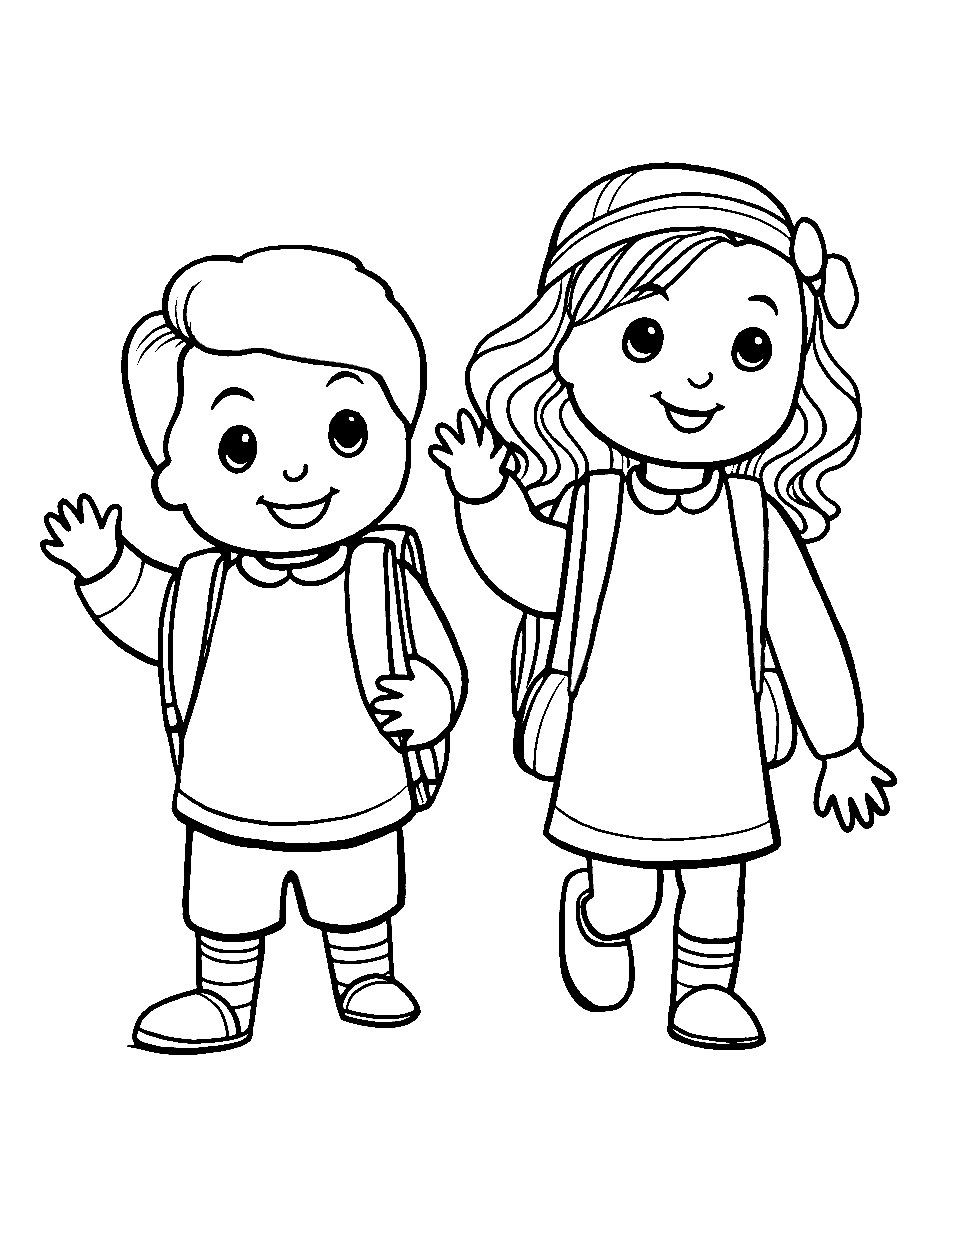 First Day Smiles Coloring Page - Children with backpacks waving goodbye to their parents.